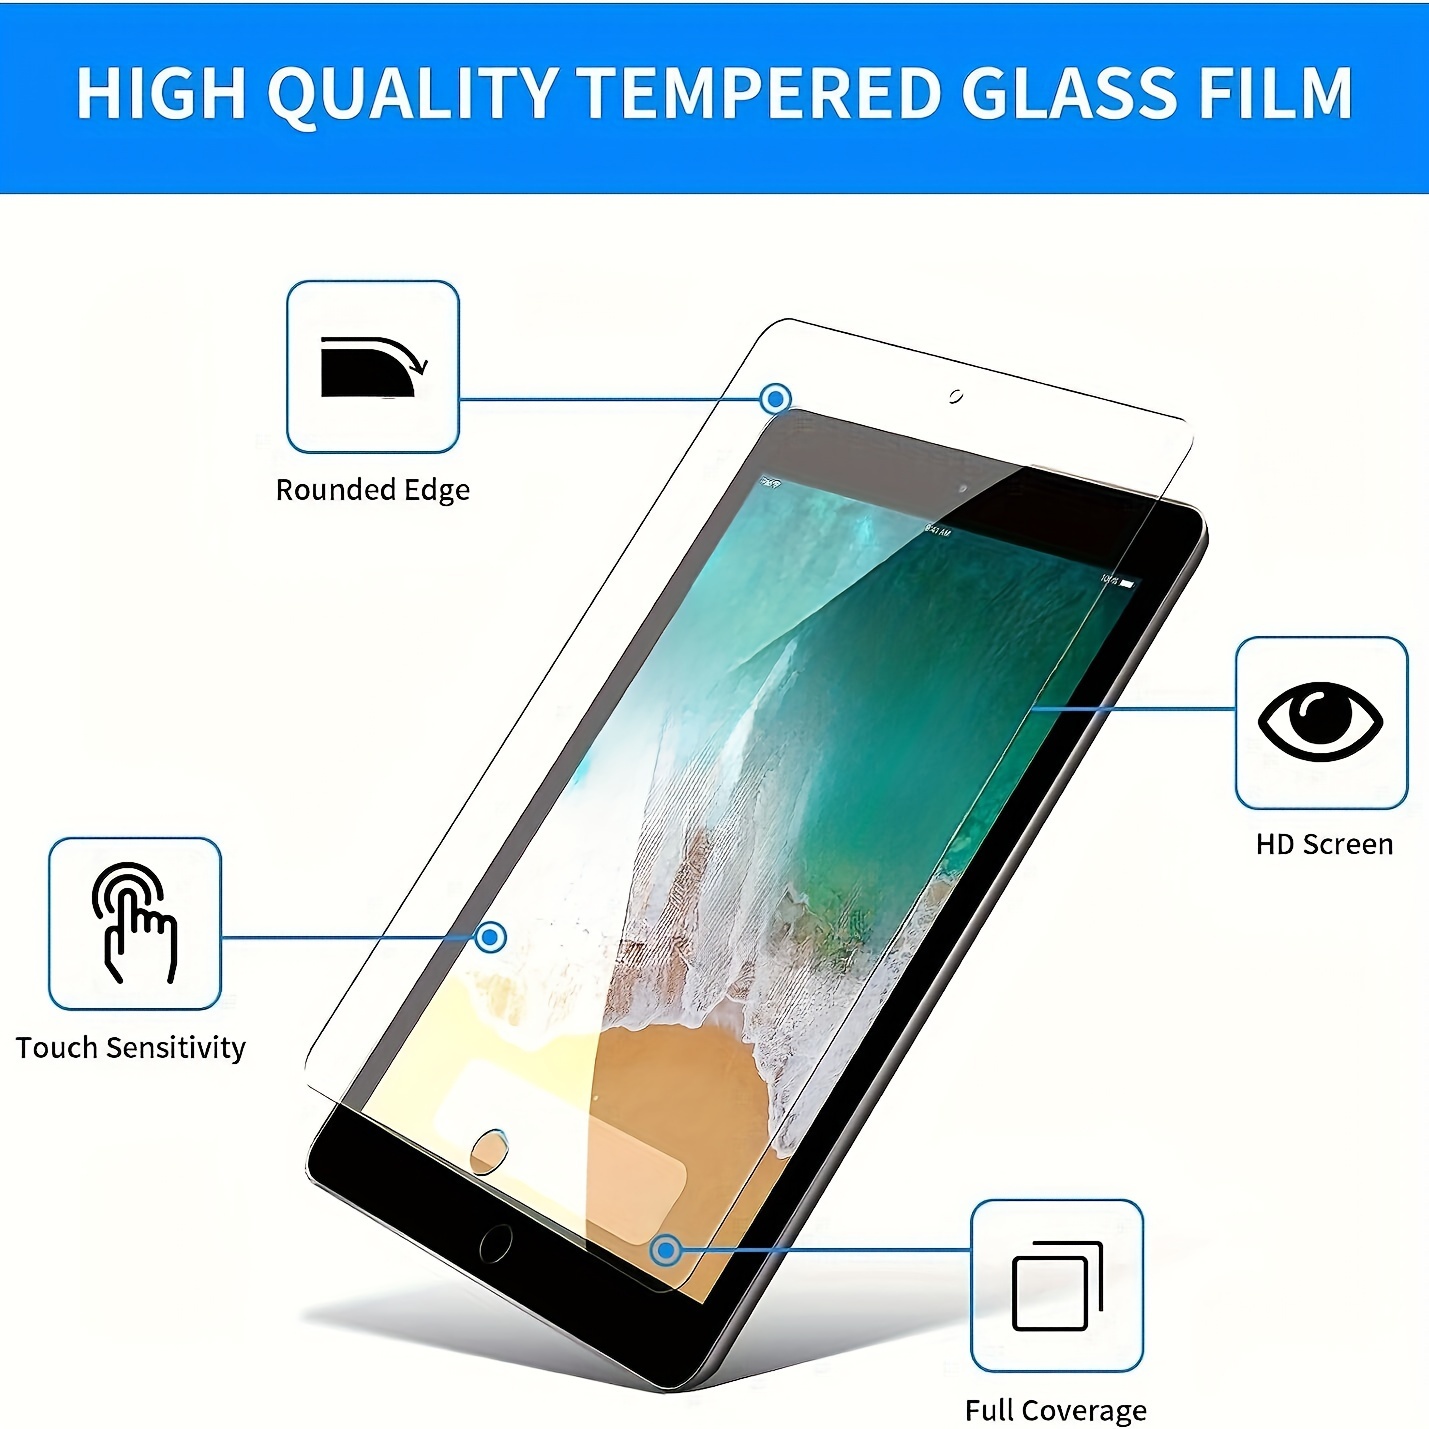 (2 Packs) Tempered Glass For Apple iPad 6 9.7 2018 6th Generation A1893  A1954 Anti-Scratch Tablet Screen Protector Film